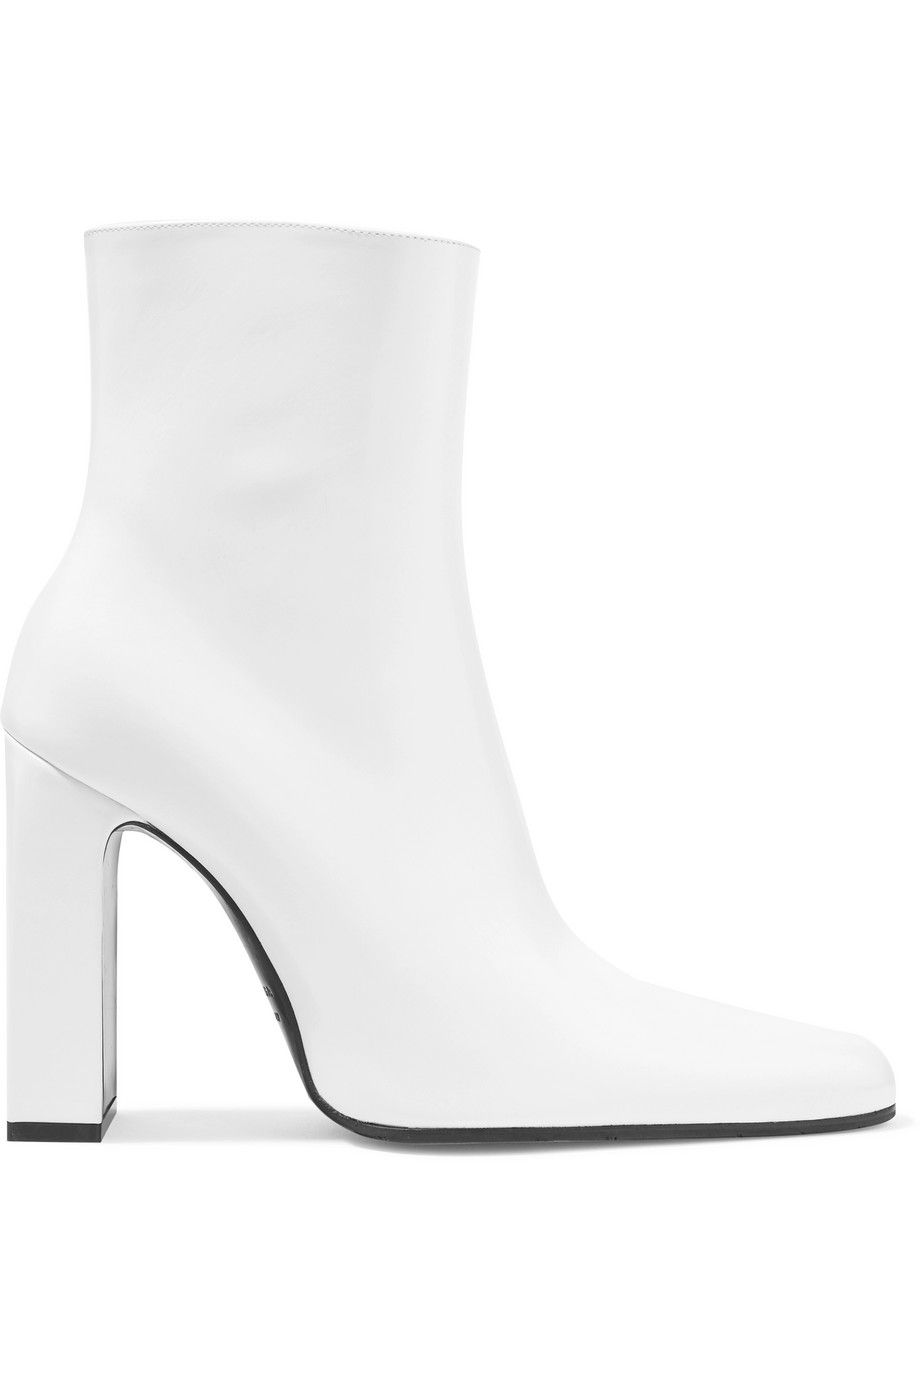 best white boots 2019